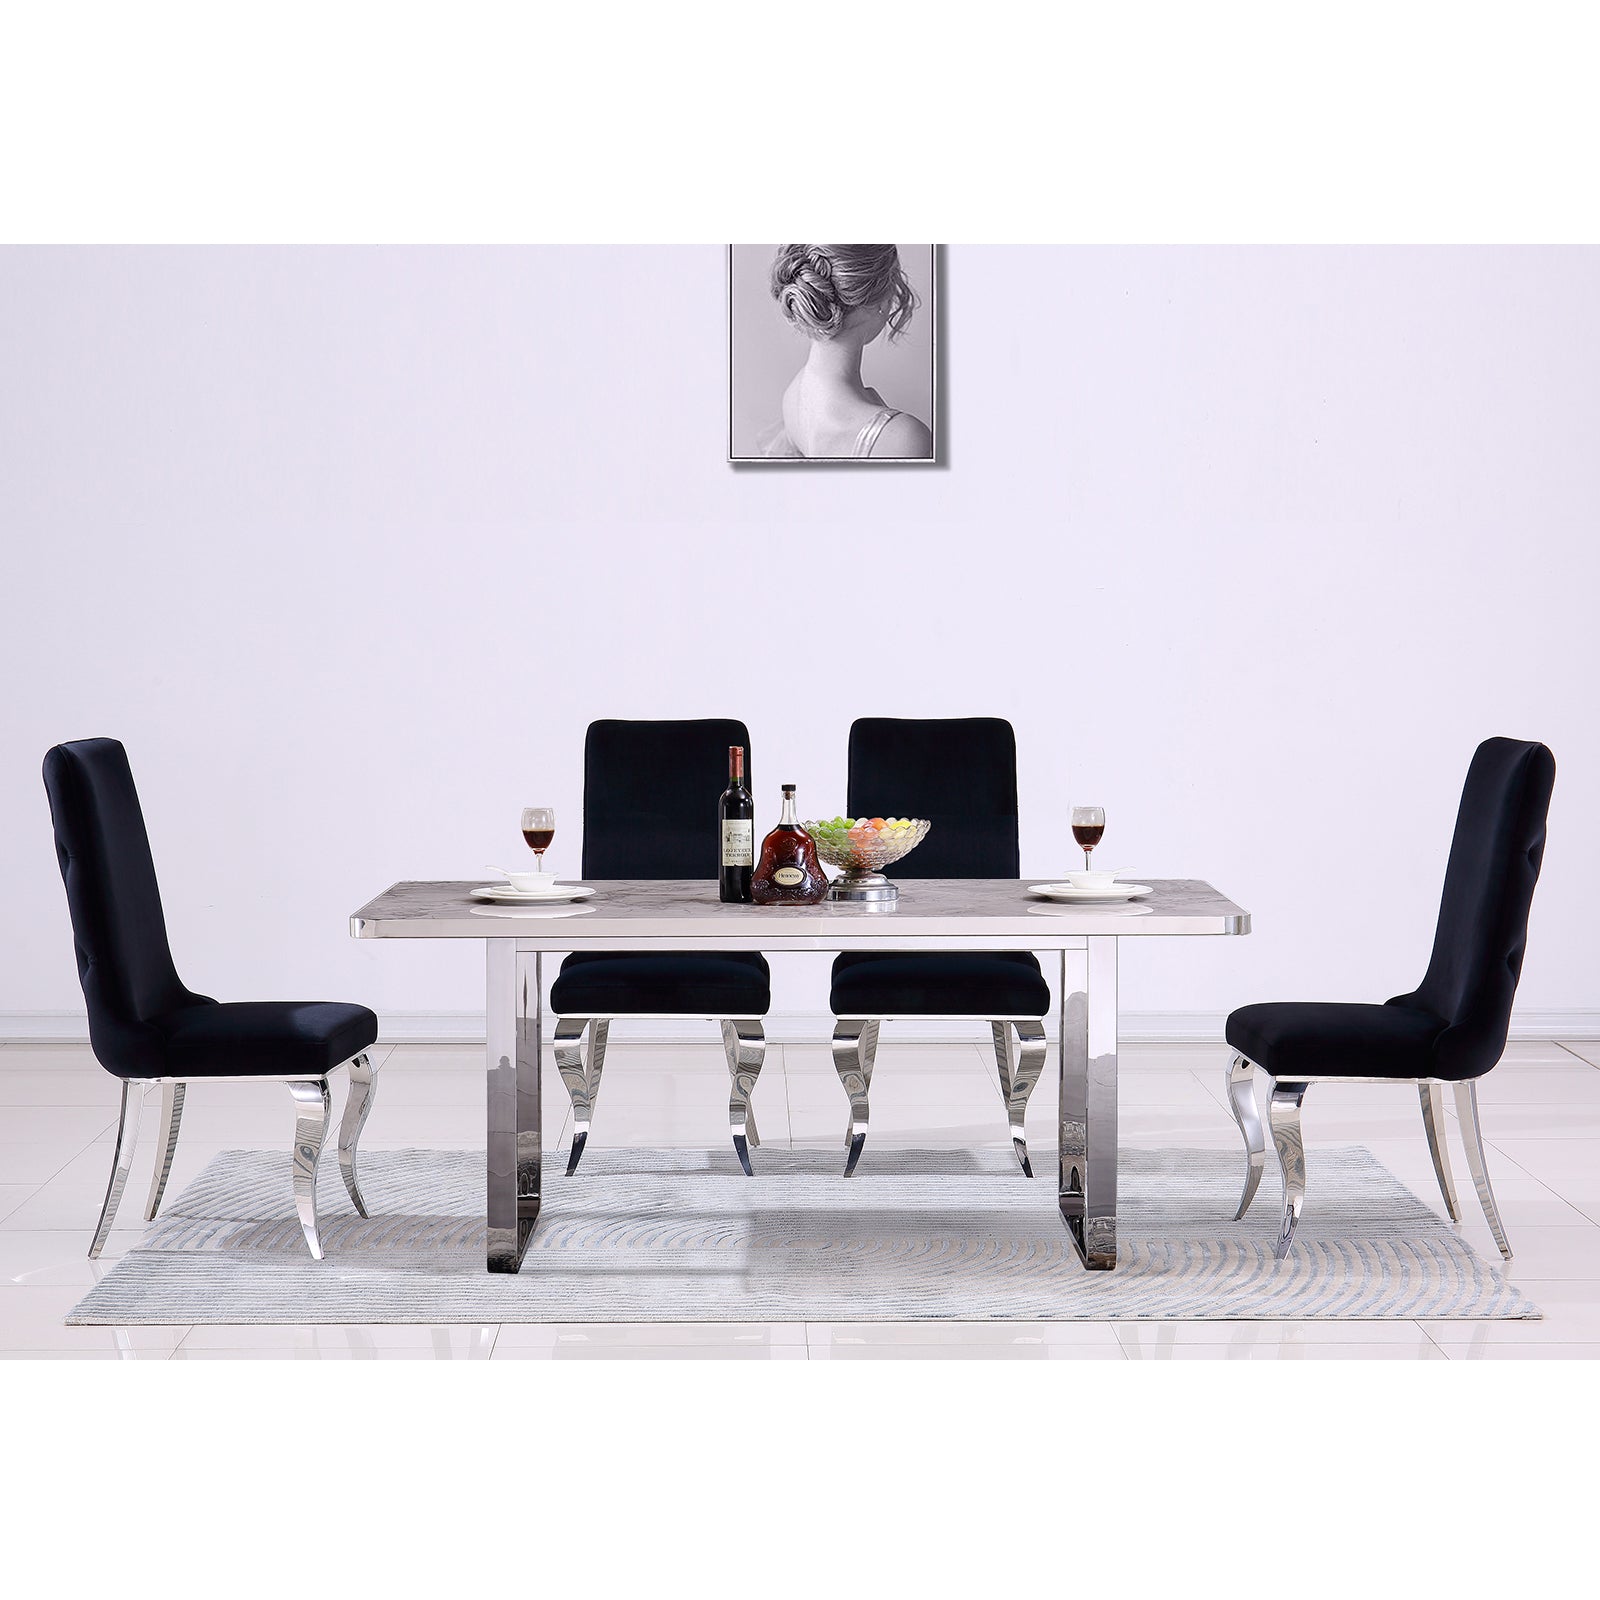 709 Set | AUZ Black and Silver Dining room Sets for 6